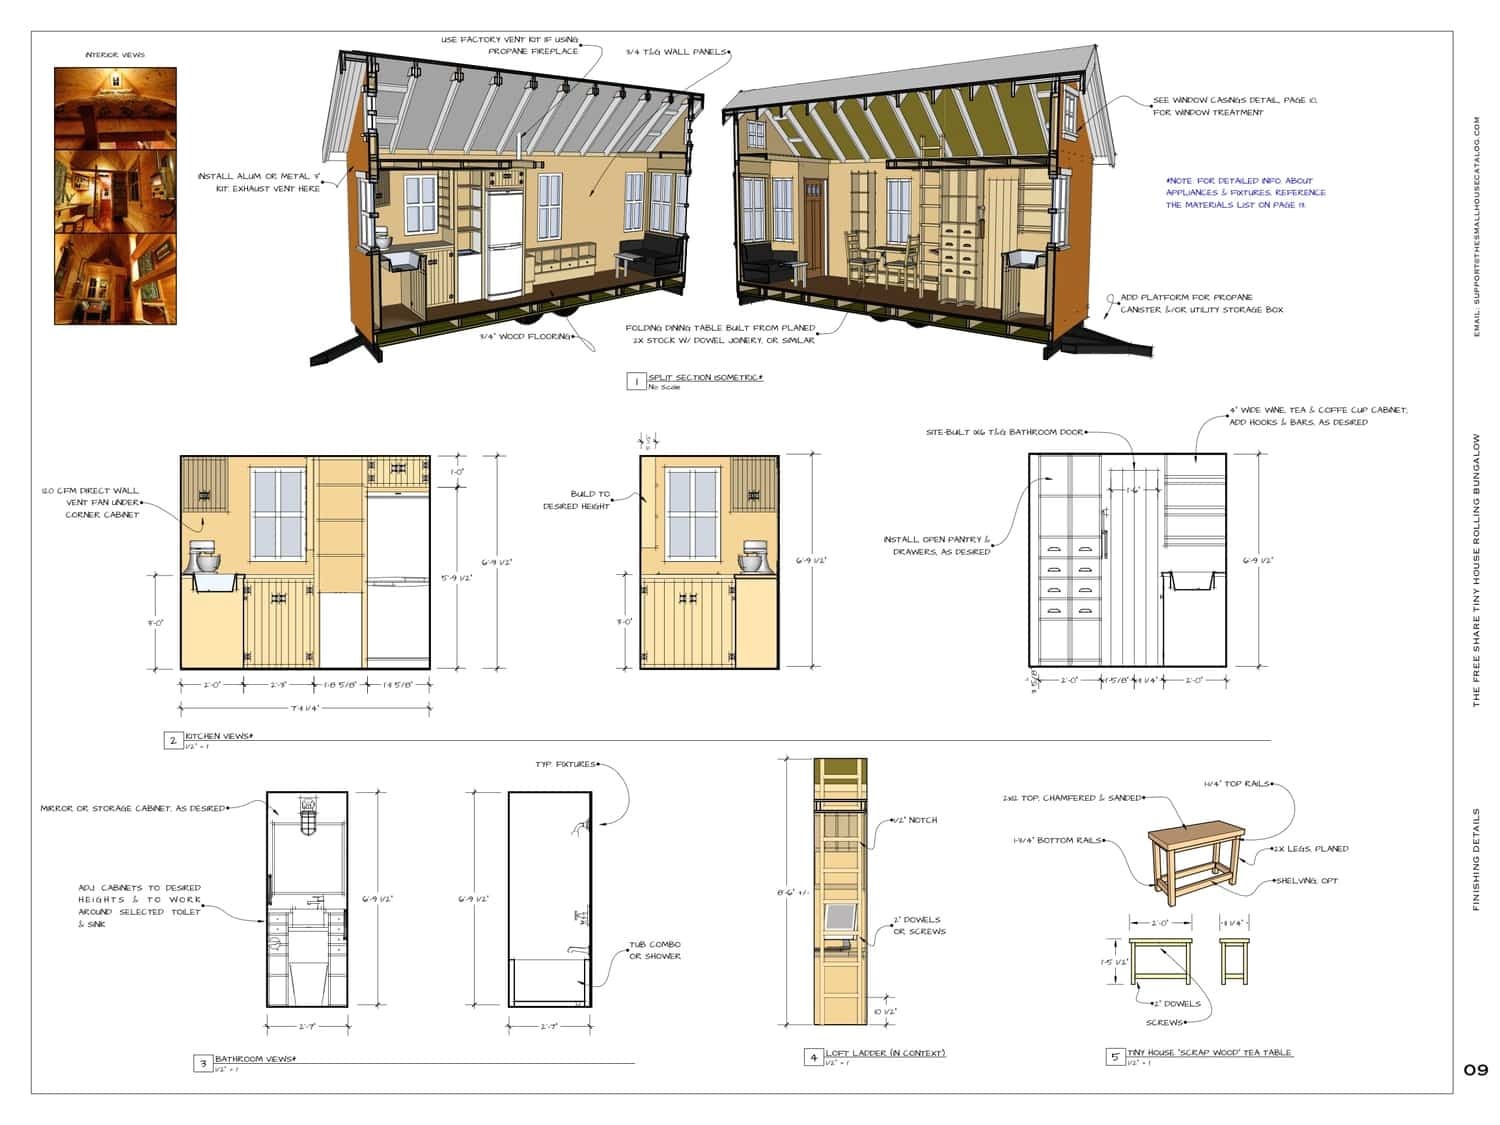 Home Design Plans Free Get Free Plans to Build This Adorable Tiny Bungalow Tiny